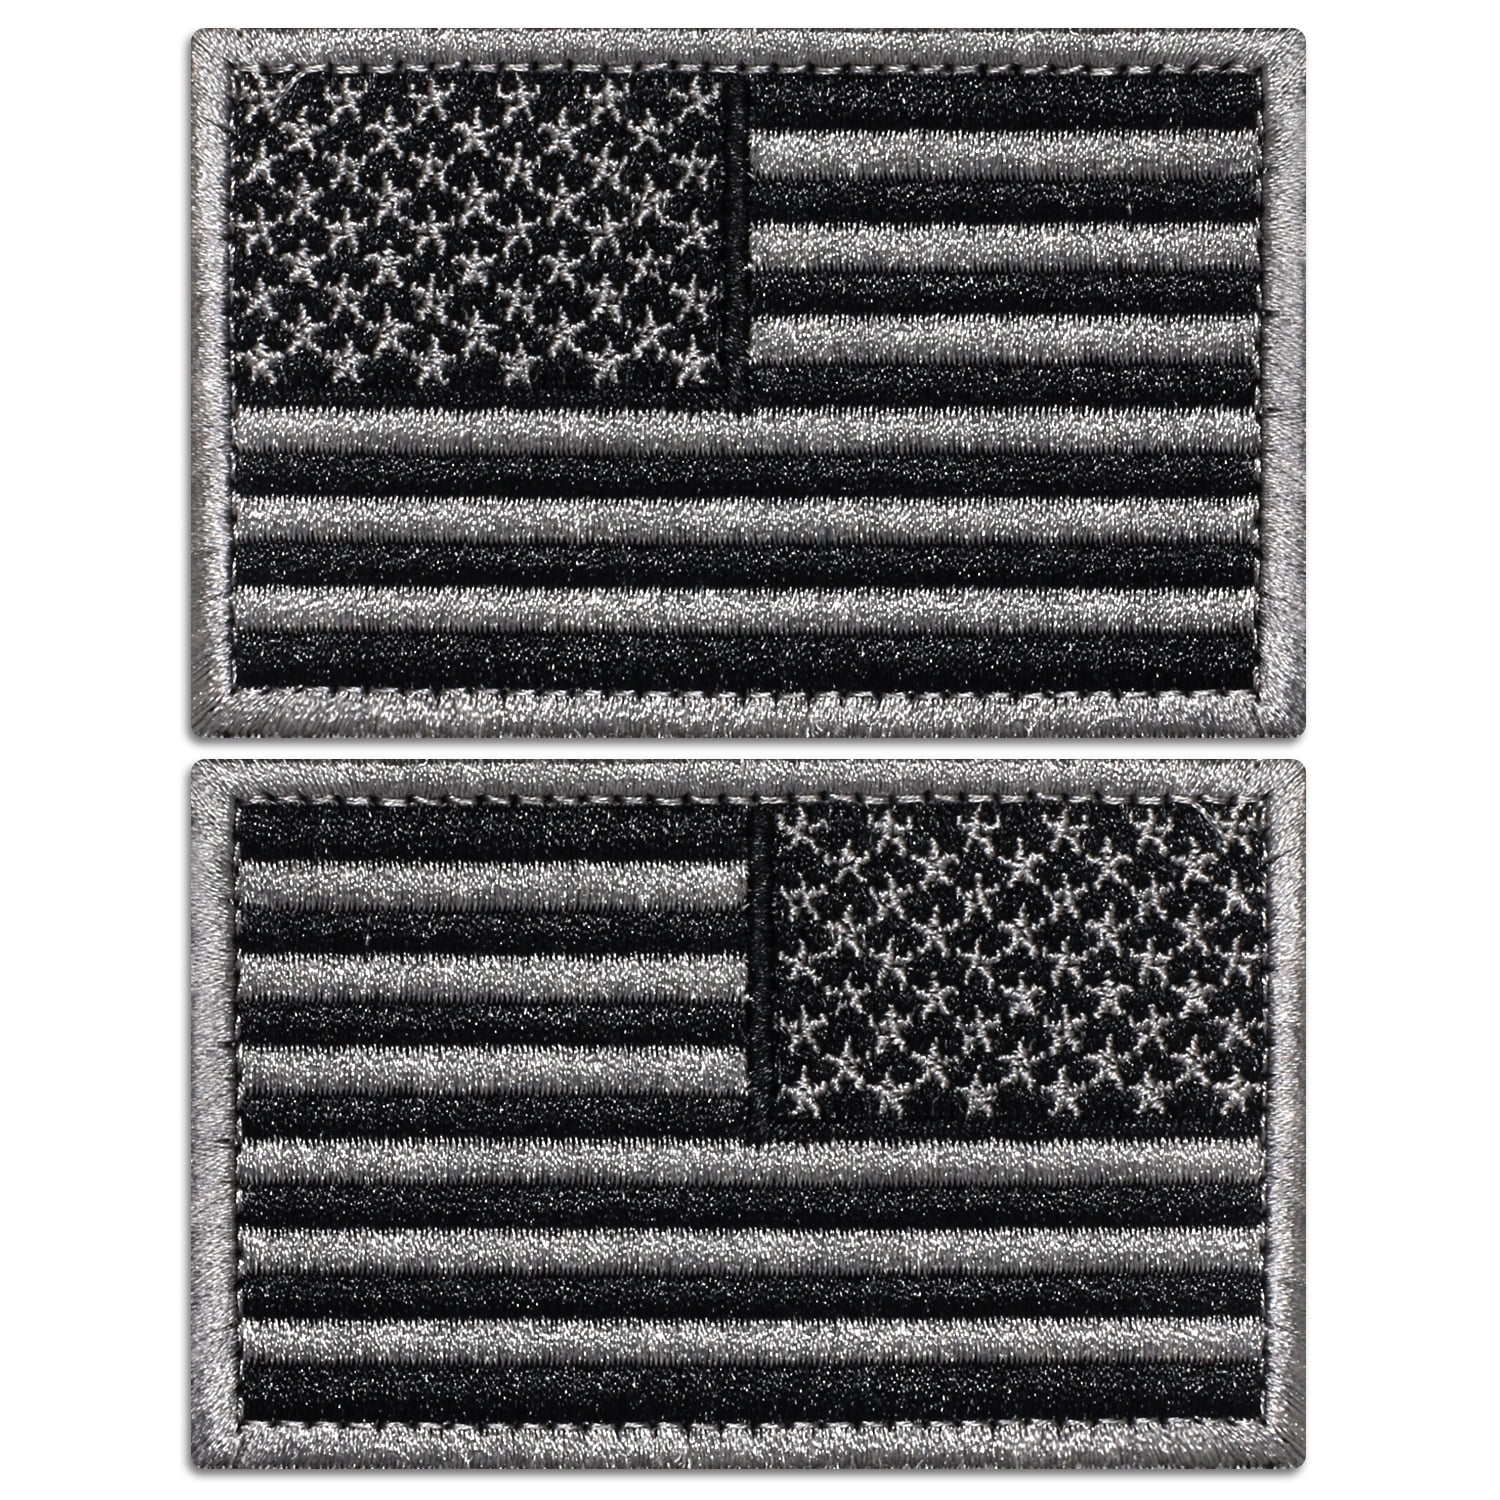 American / Mexican Flag Patch, Victory Leathers wholesale patches